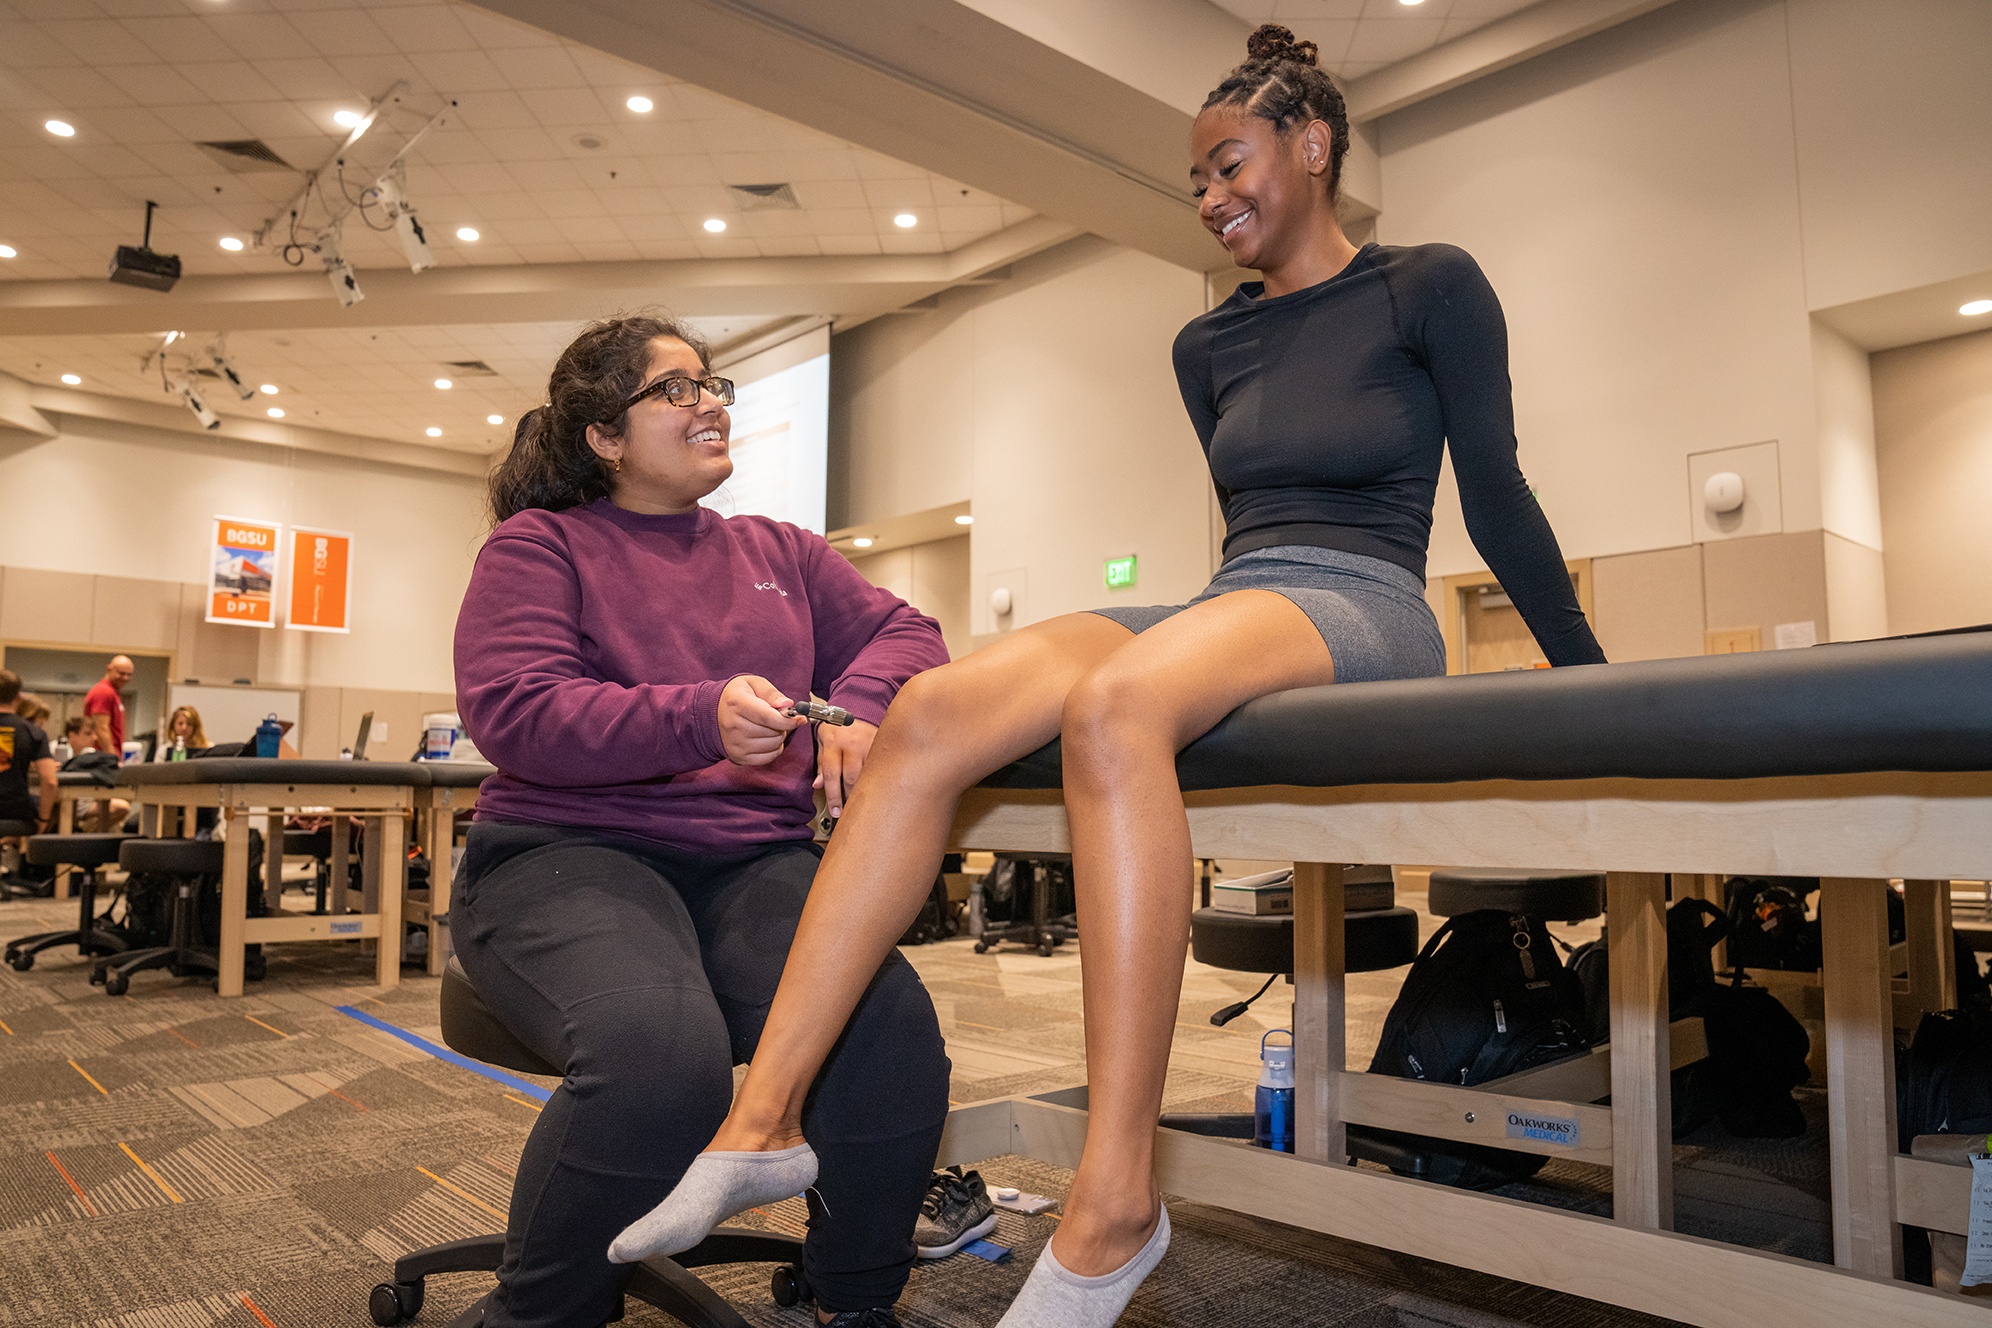 Meena Dhawan checks the knee reflexes of her classmate Mekayla Abrahams during a recent two-week visit to campus as part of the University's new hybrid, accelerated DPT program.